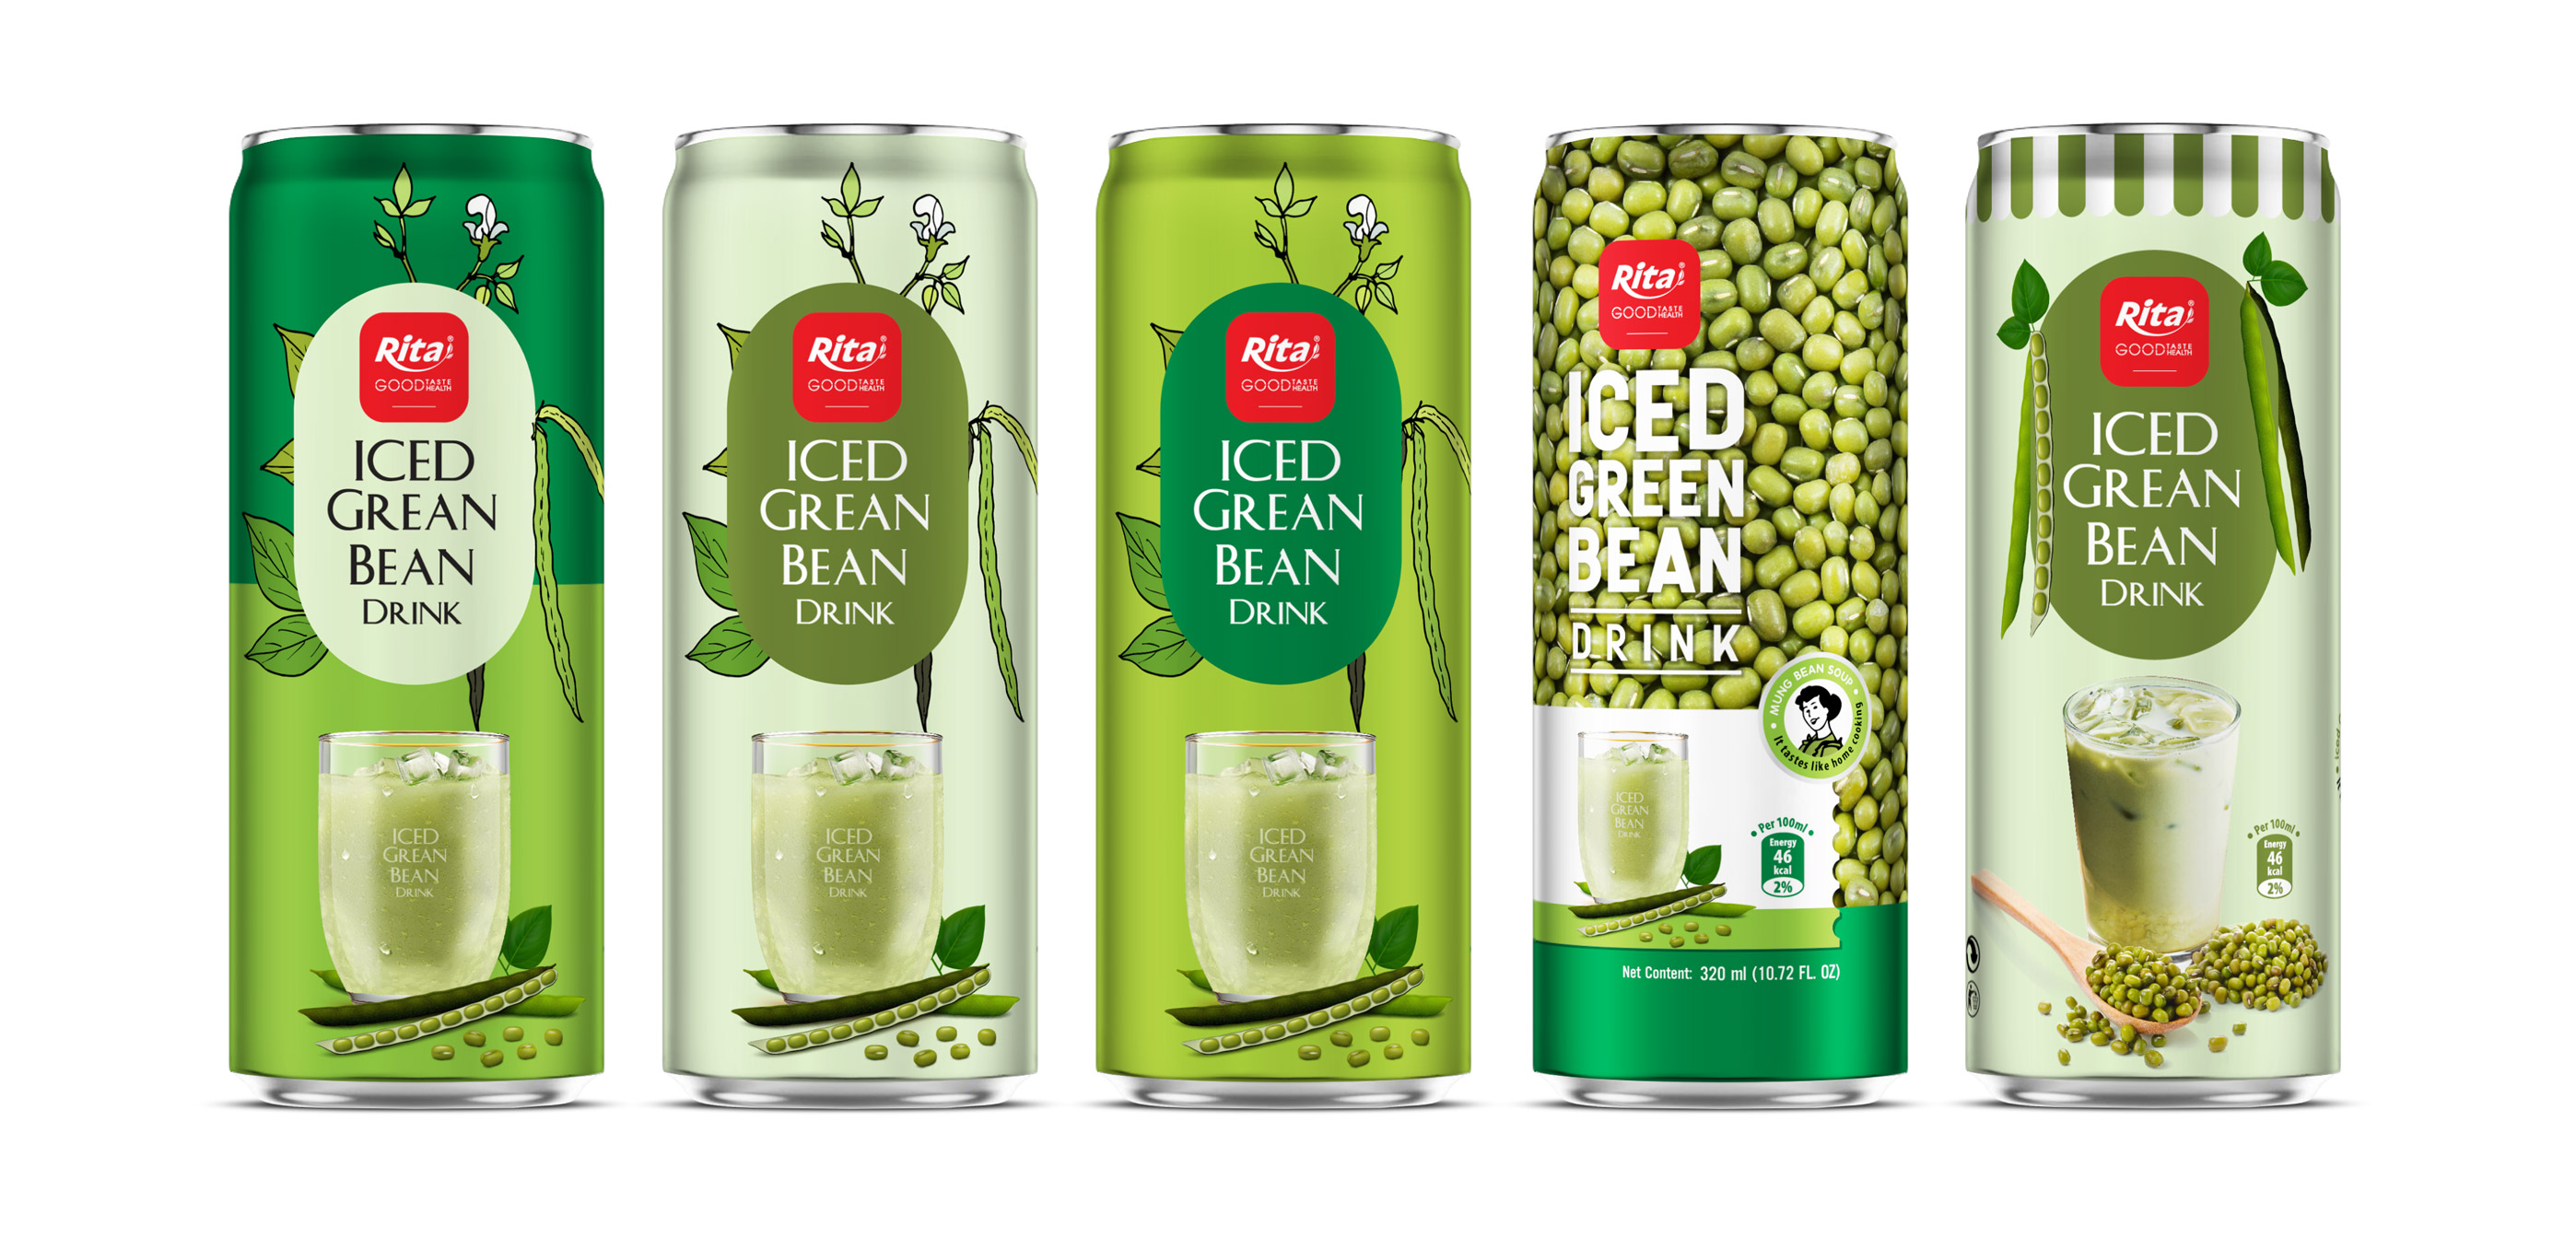 Totals iced Grean Bean drink 320ml Eng